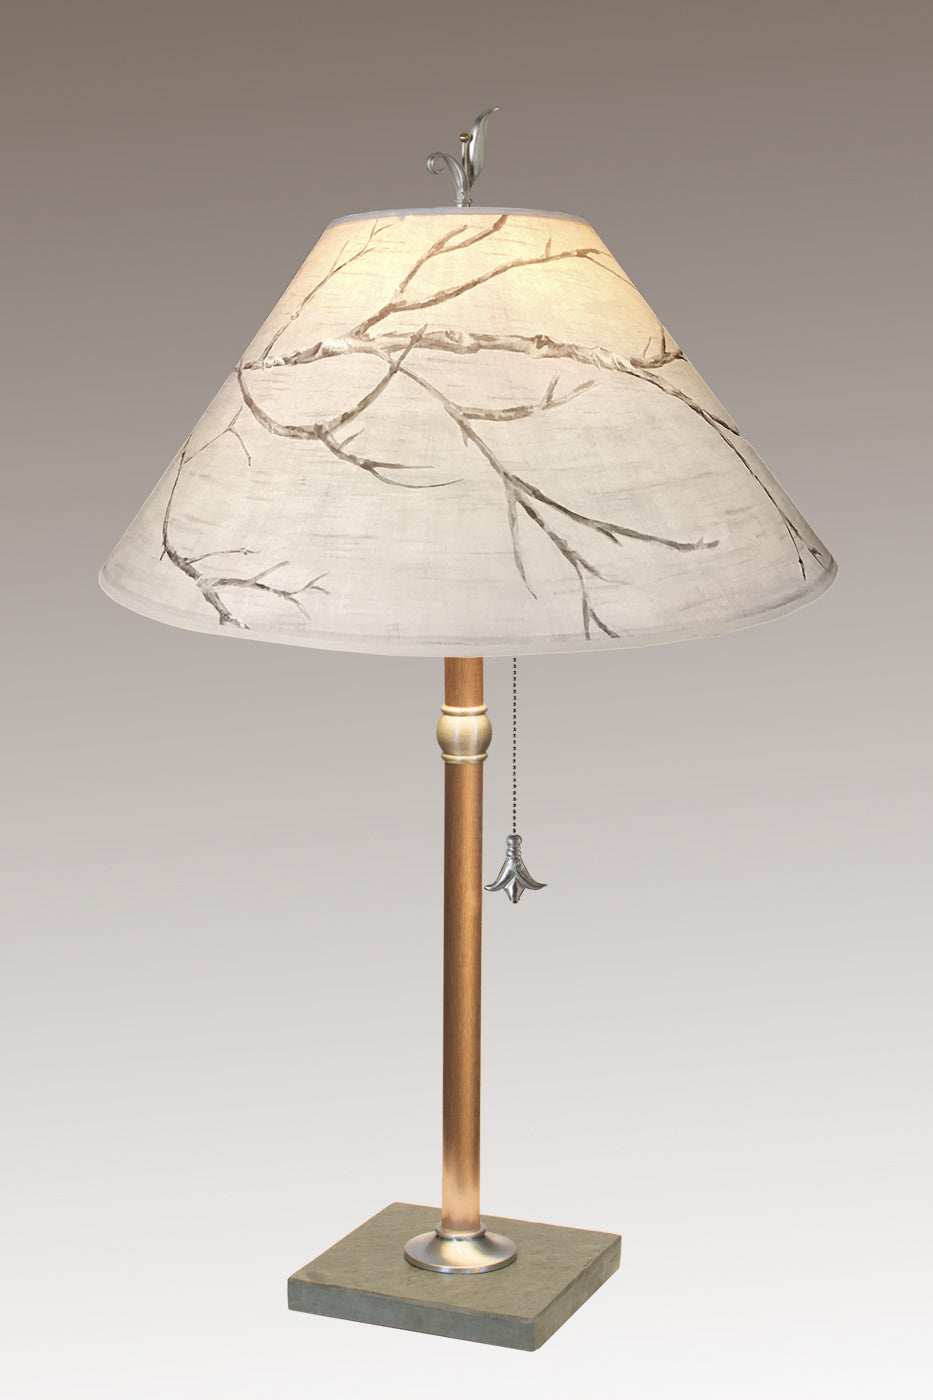 Copper Table Lamp with Large Conical Shade in Sweeping Branch